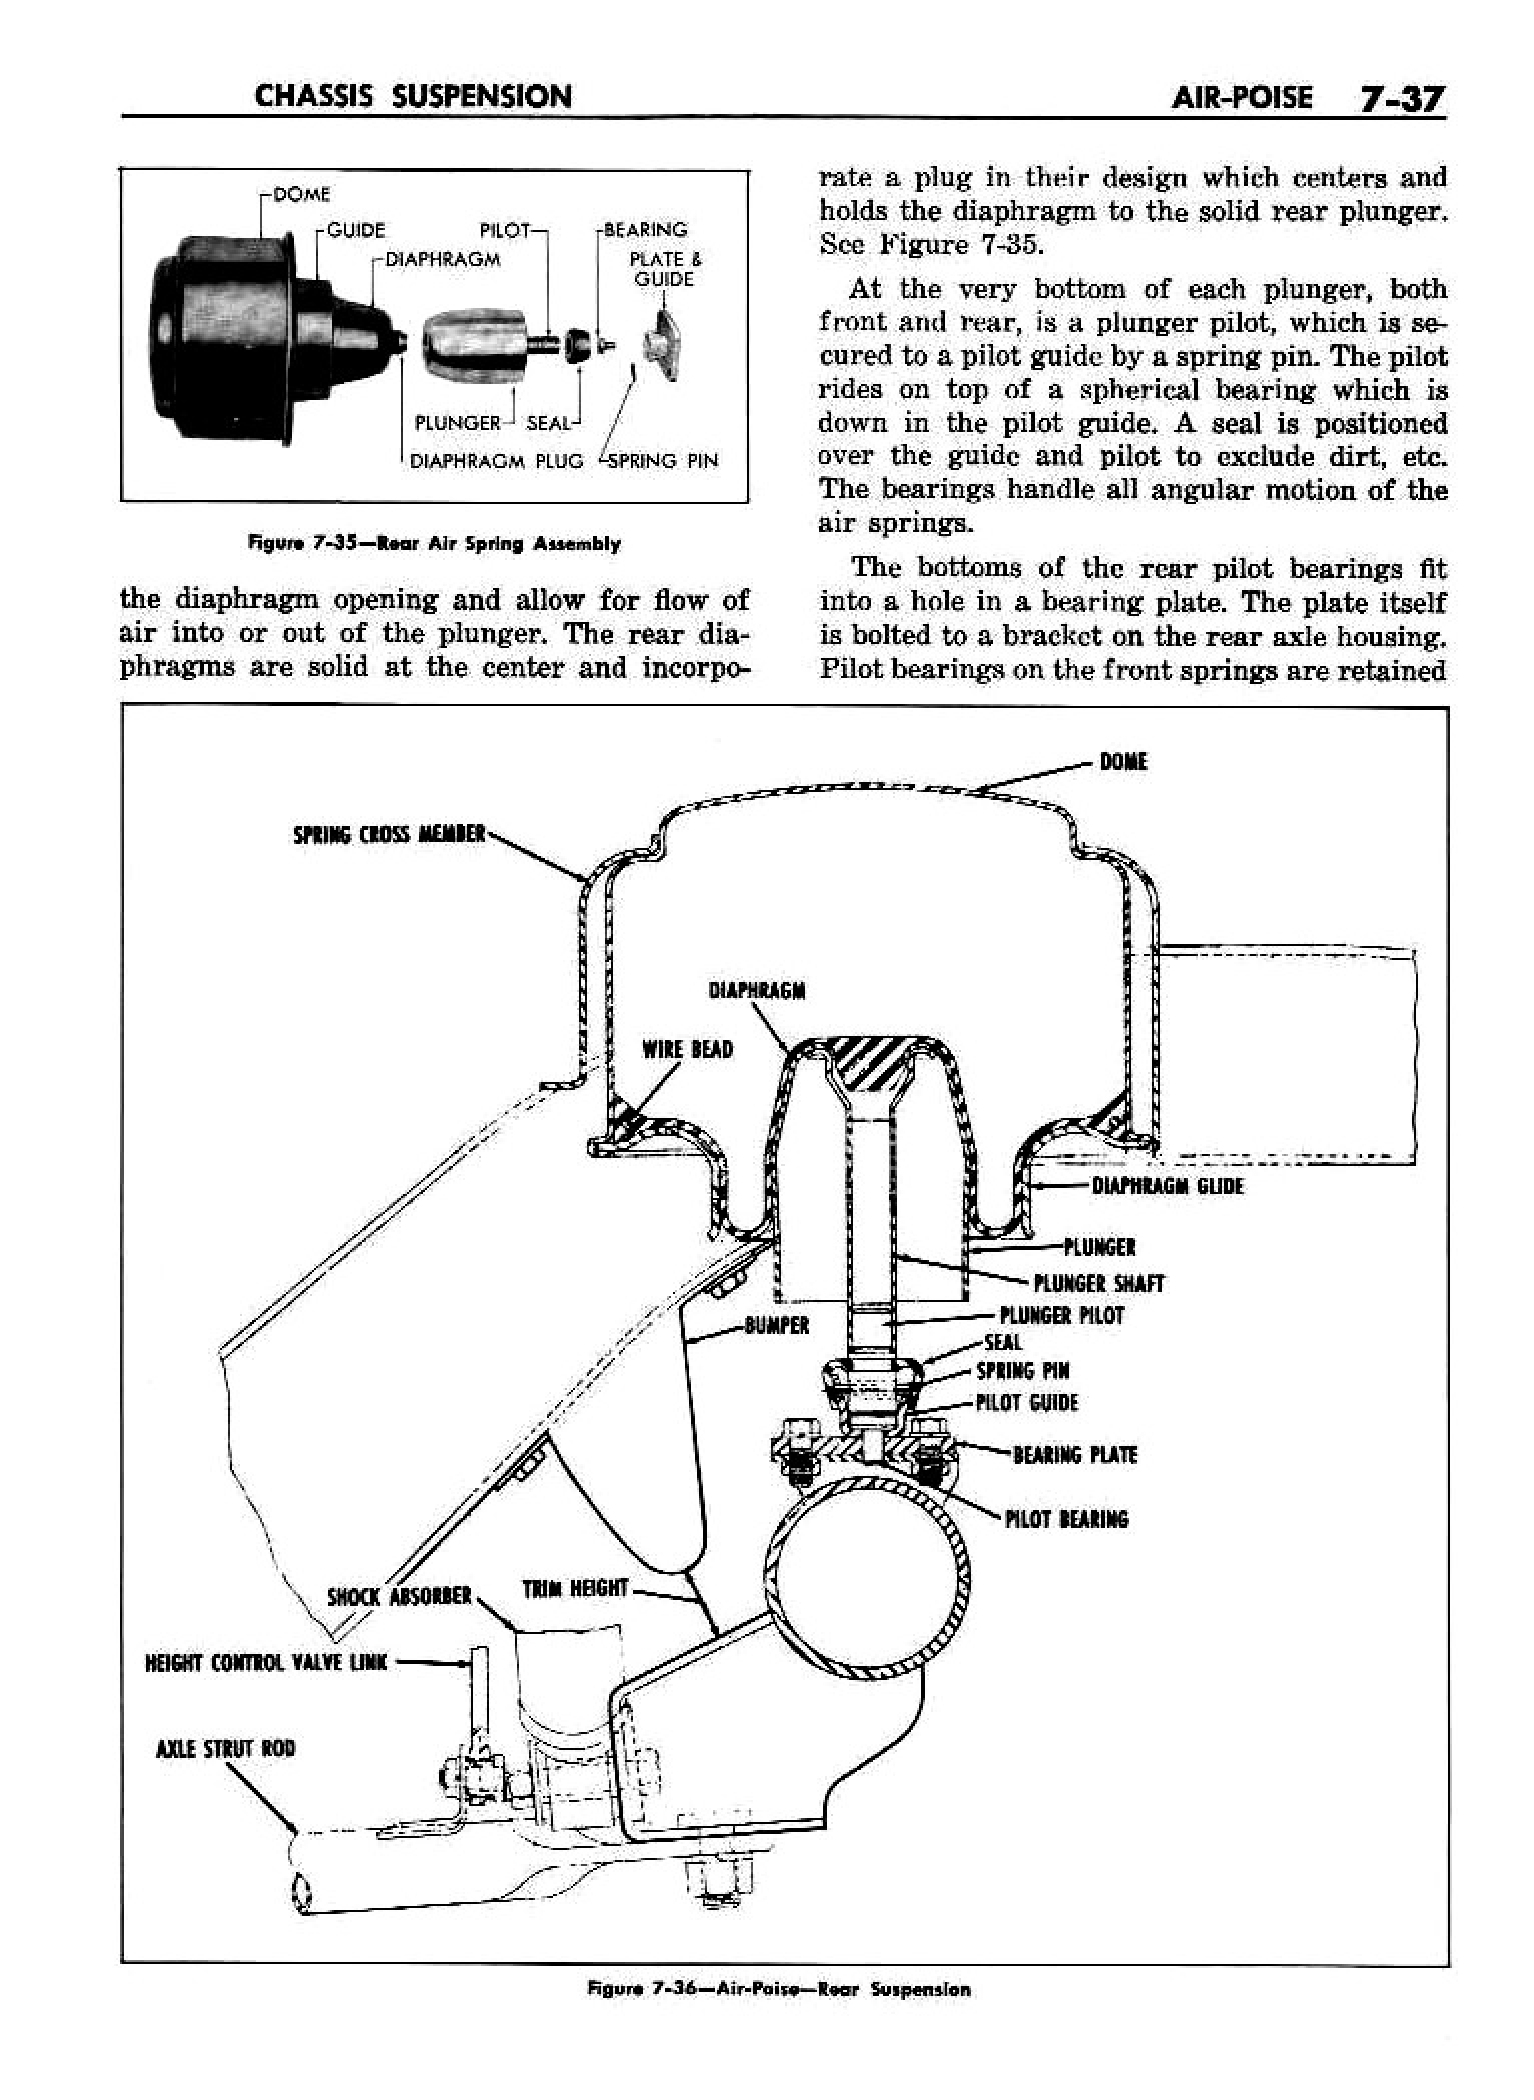 n_08 1958 Buick Shop Manual - Chassis Suspension_37.jpg